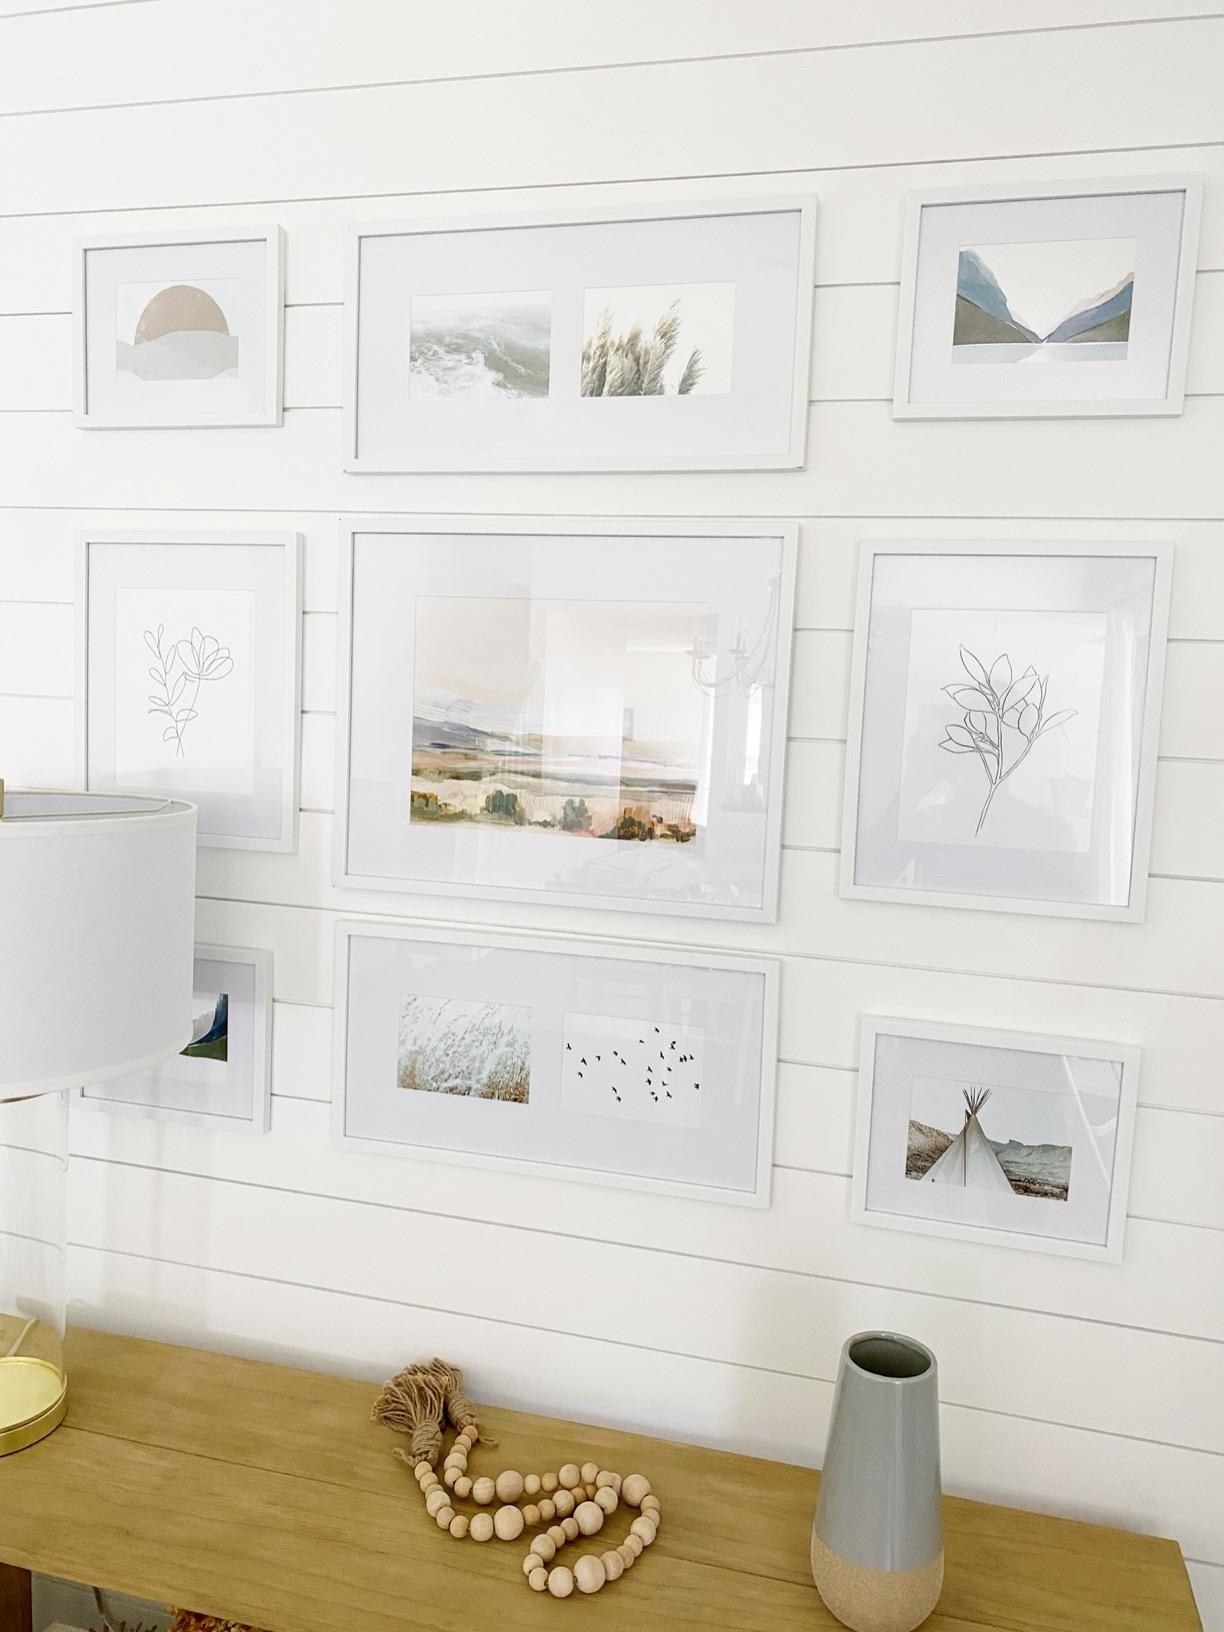 A reviewer&#x27;s gallery wall using the white frames